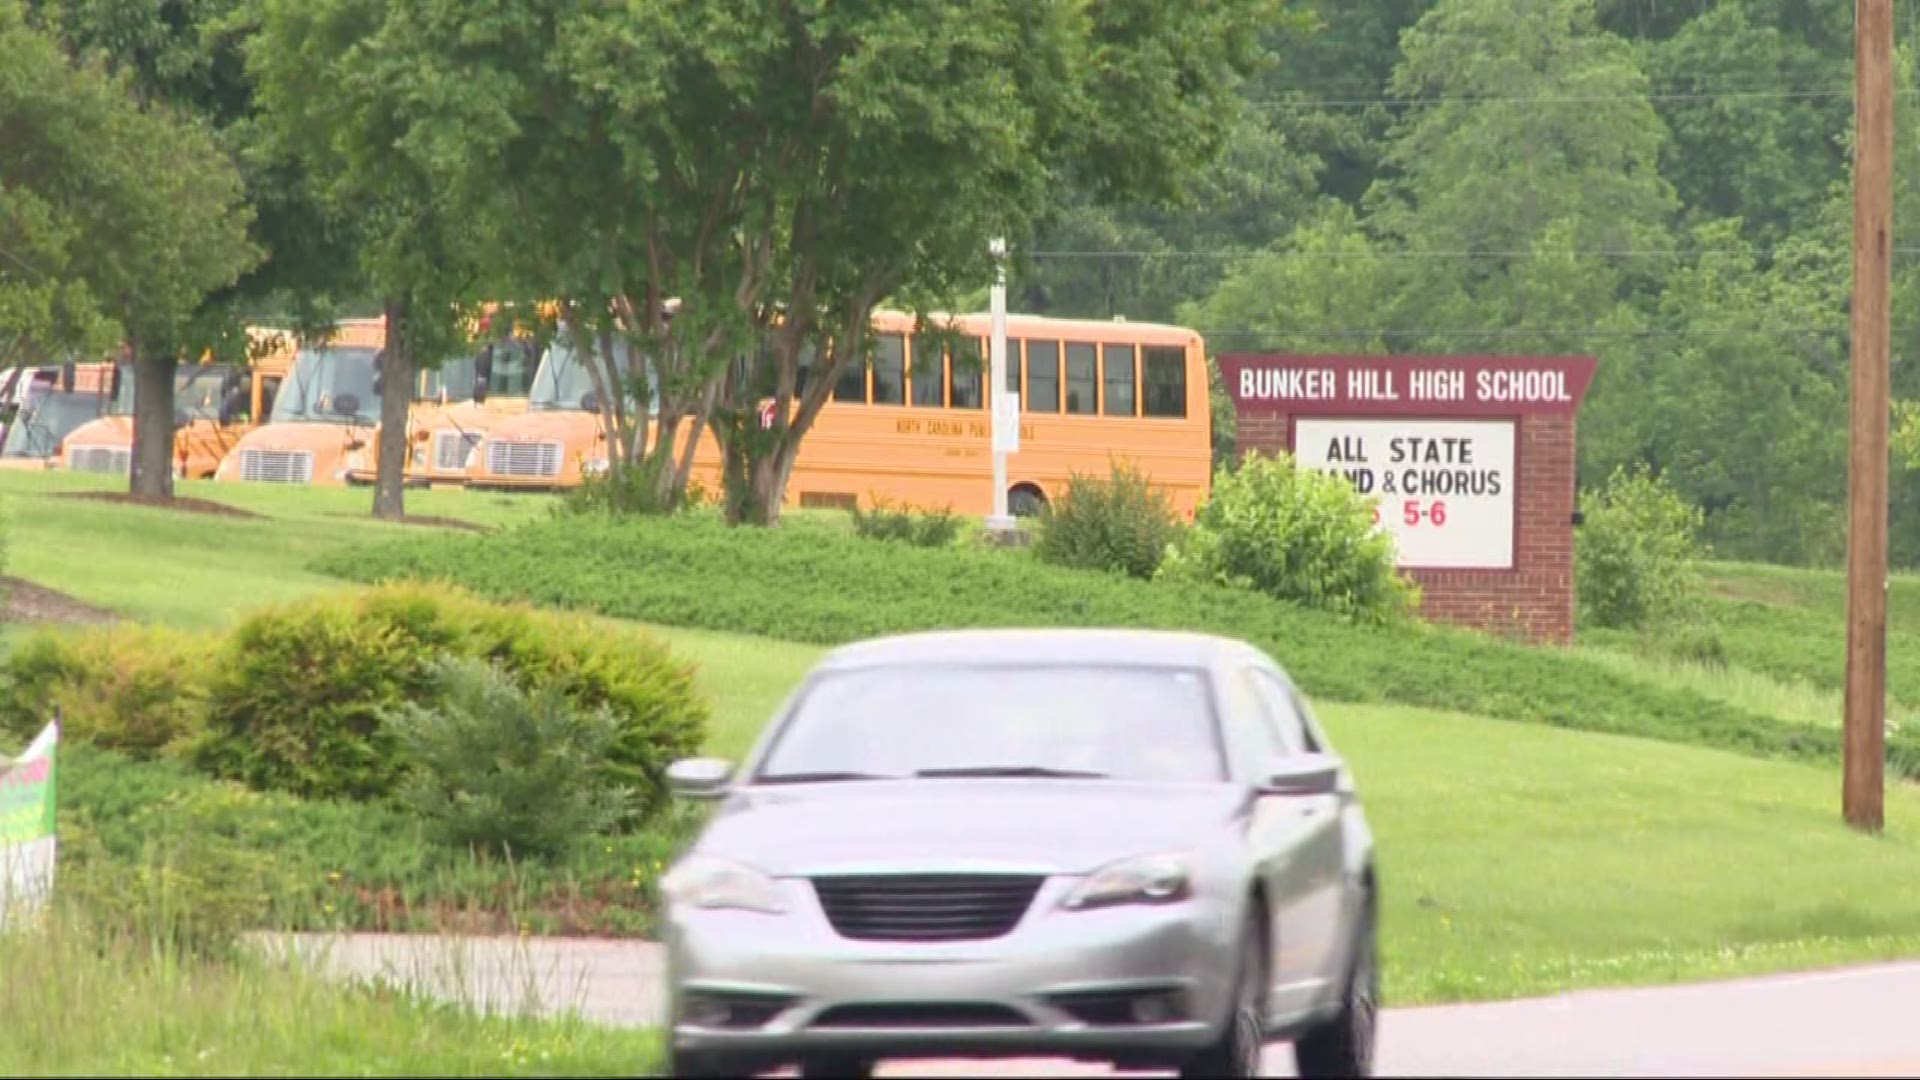 Extra police were on duty at Bunker Hill High school in Catawba County today following a threat to the school made yesterday on social media.